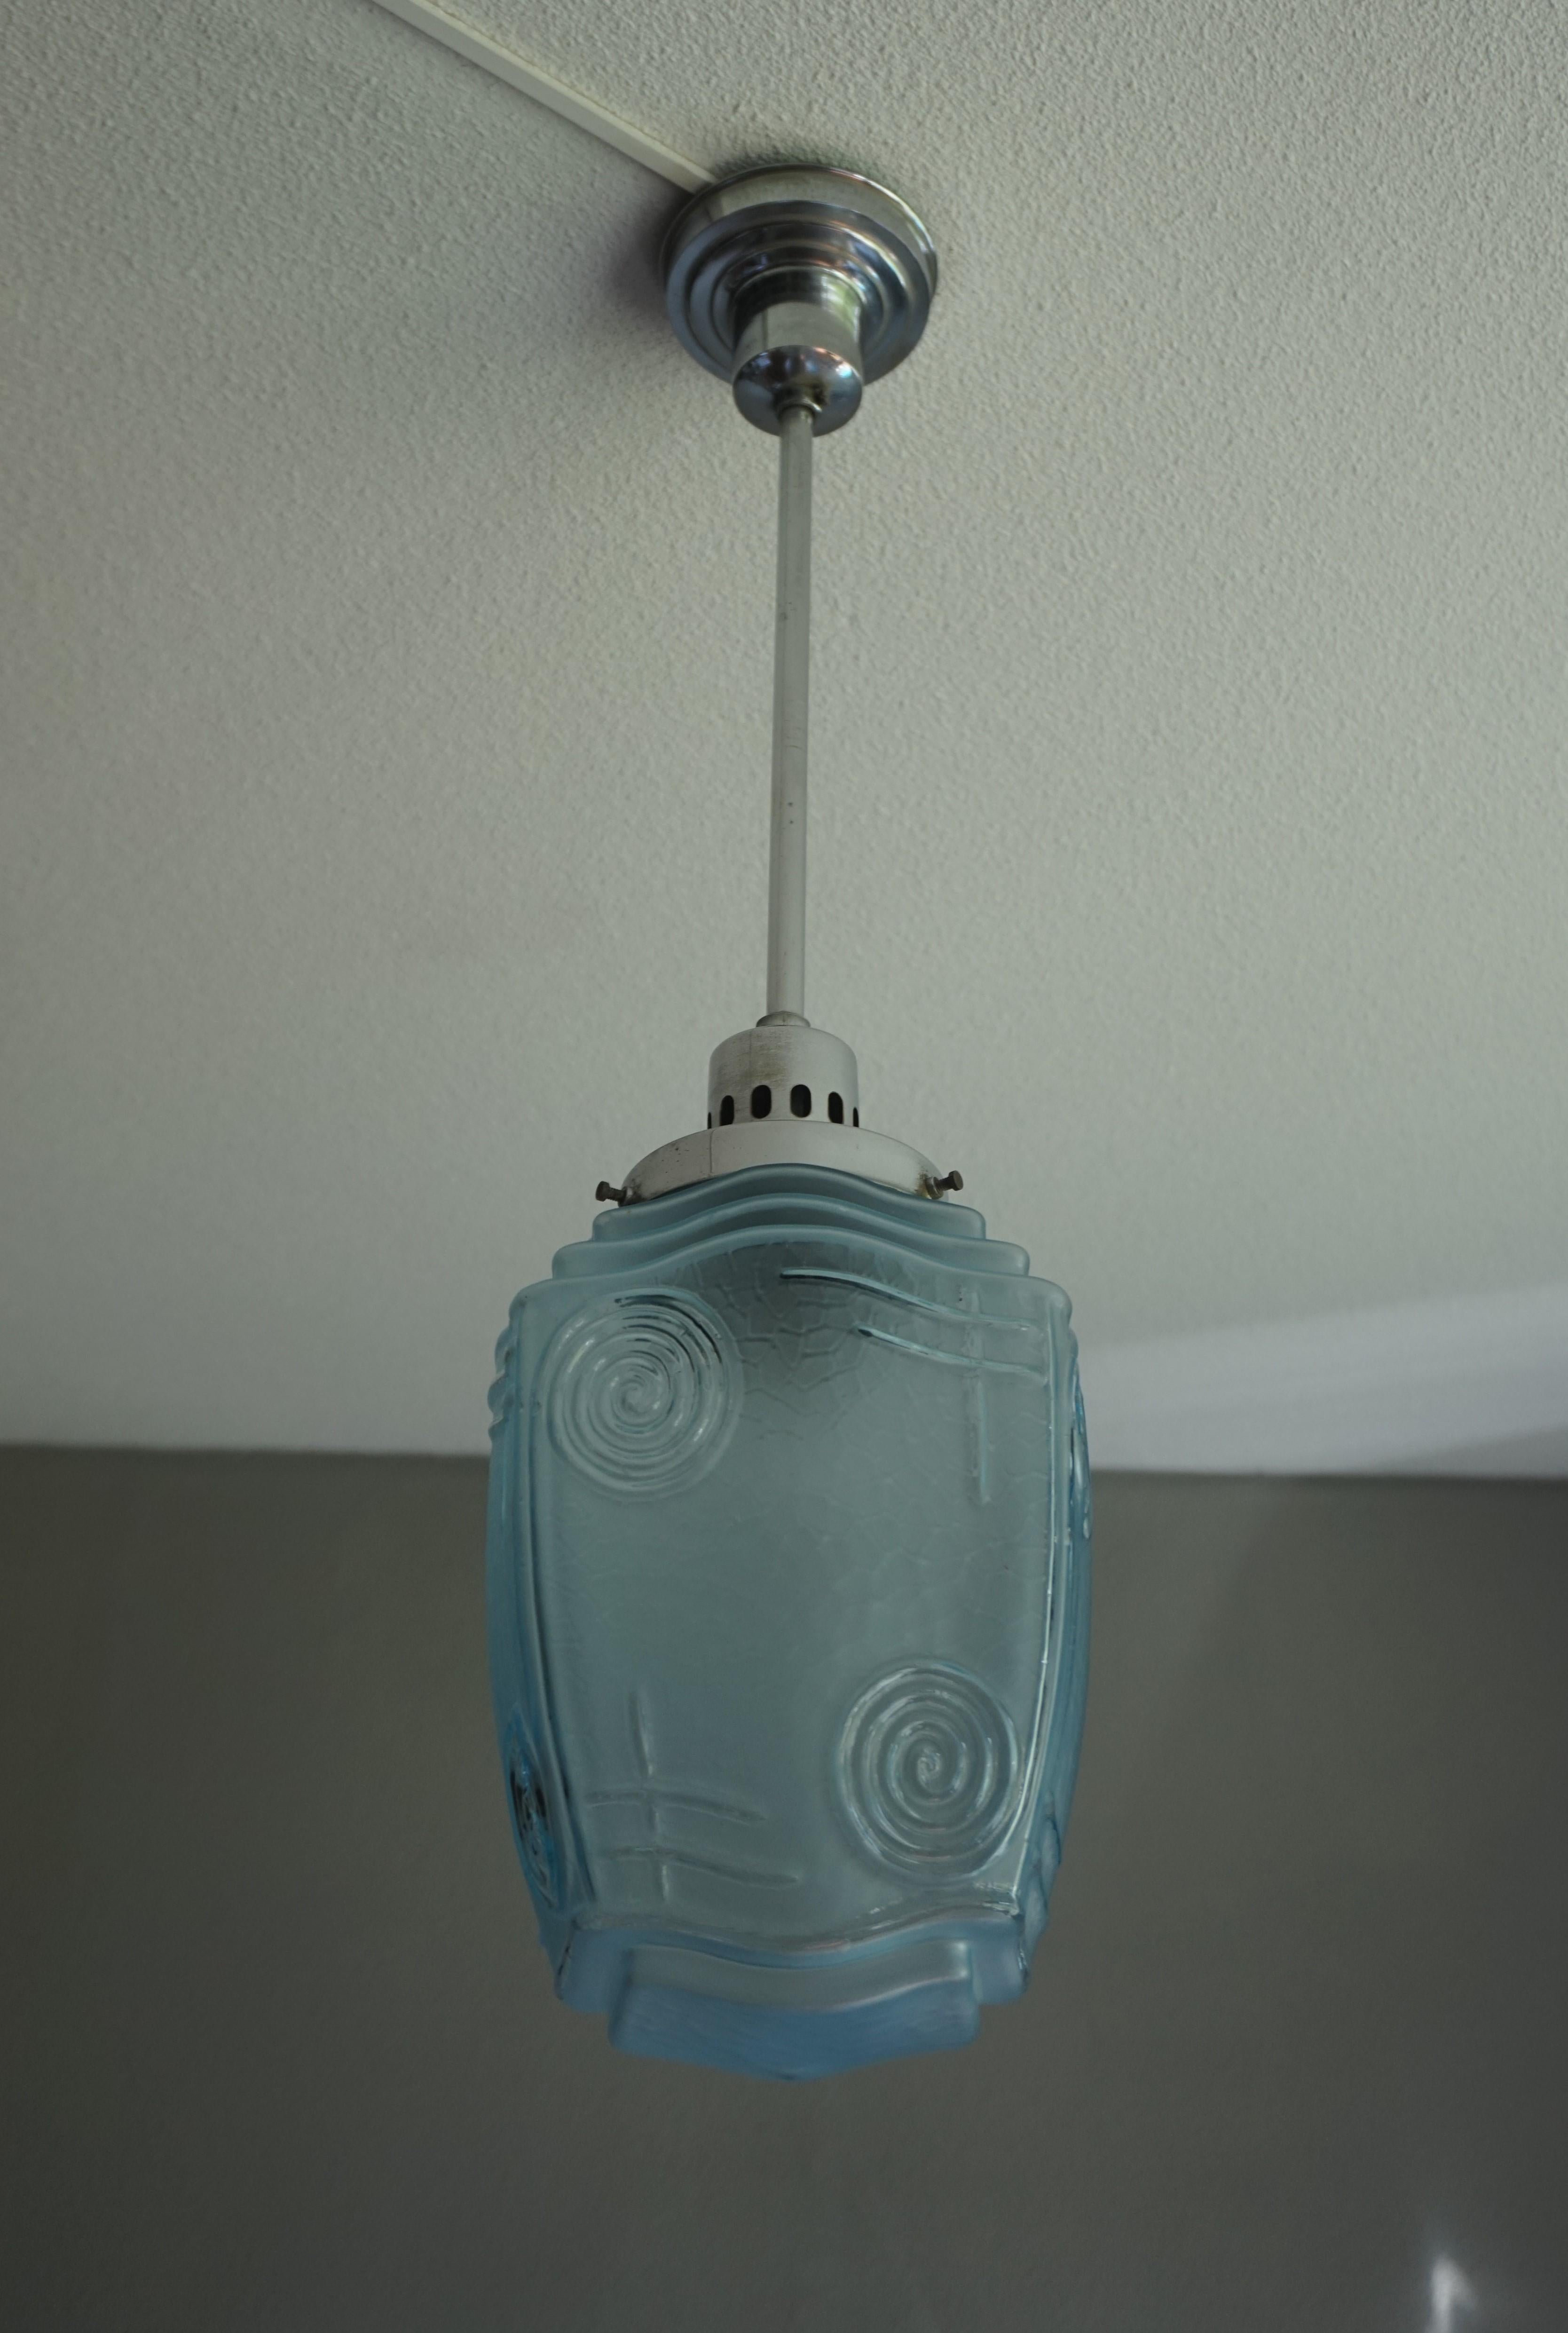 Hand-Crafted Rare and Excellent Condition Blue Glass and Chrome Metal Art Deco Pendant Light